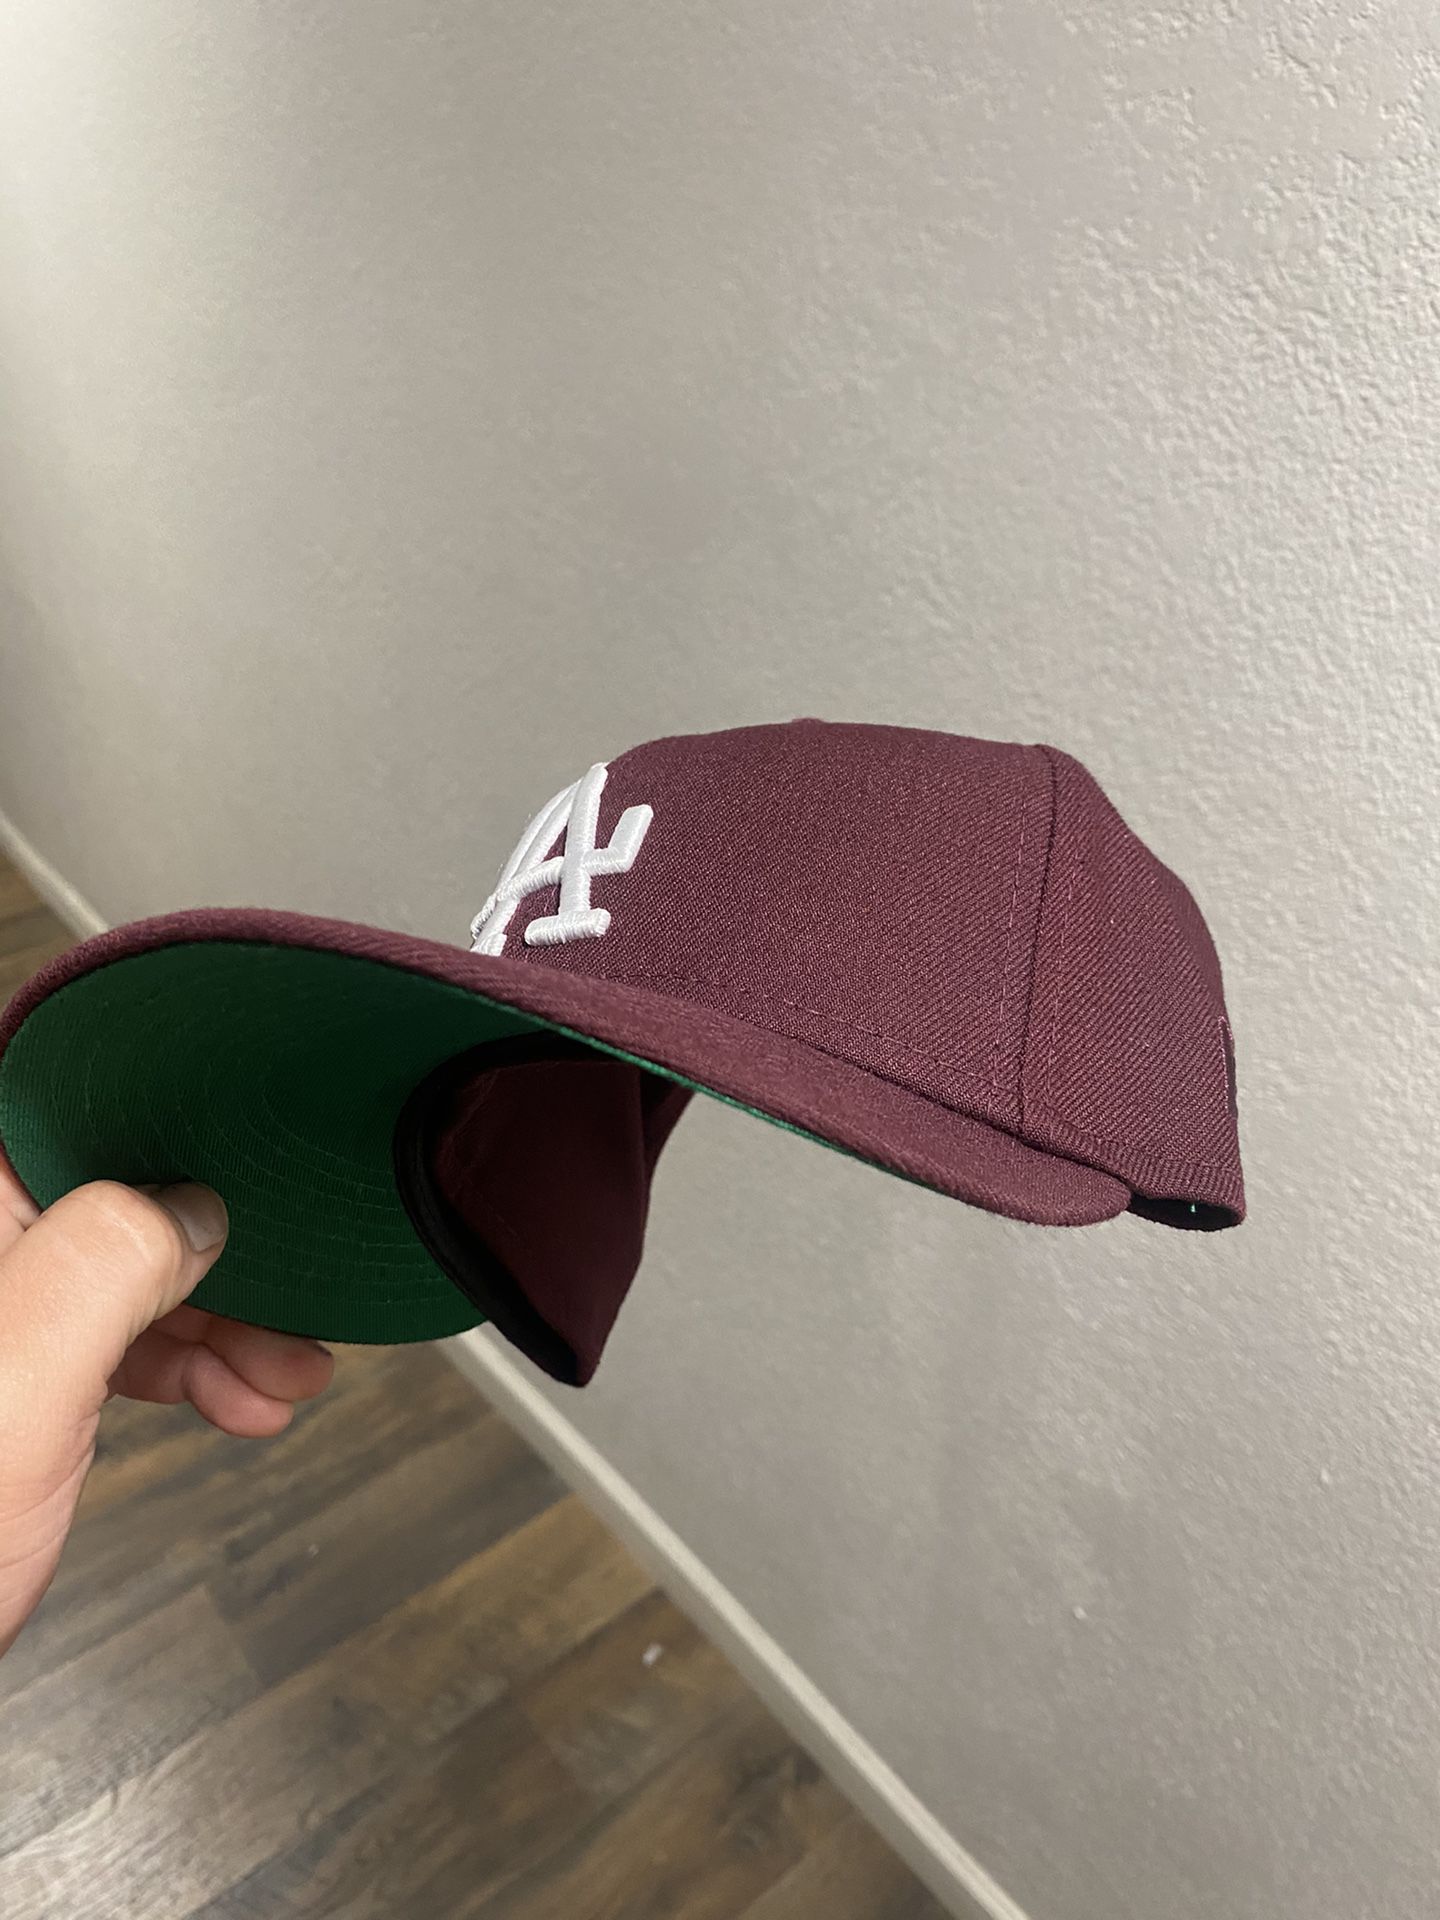 EXCLUSIVE NEW ERA 59FIFTY SAINT LOUIS CARDINALS- GREY, BLACK, PINK FITTED  HAT PIN INCLUDED. $70 OBO for Sale in Glendale, AZ - OfferUp